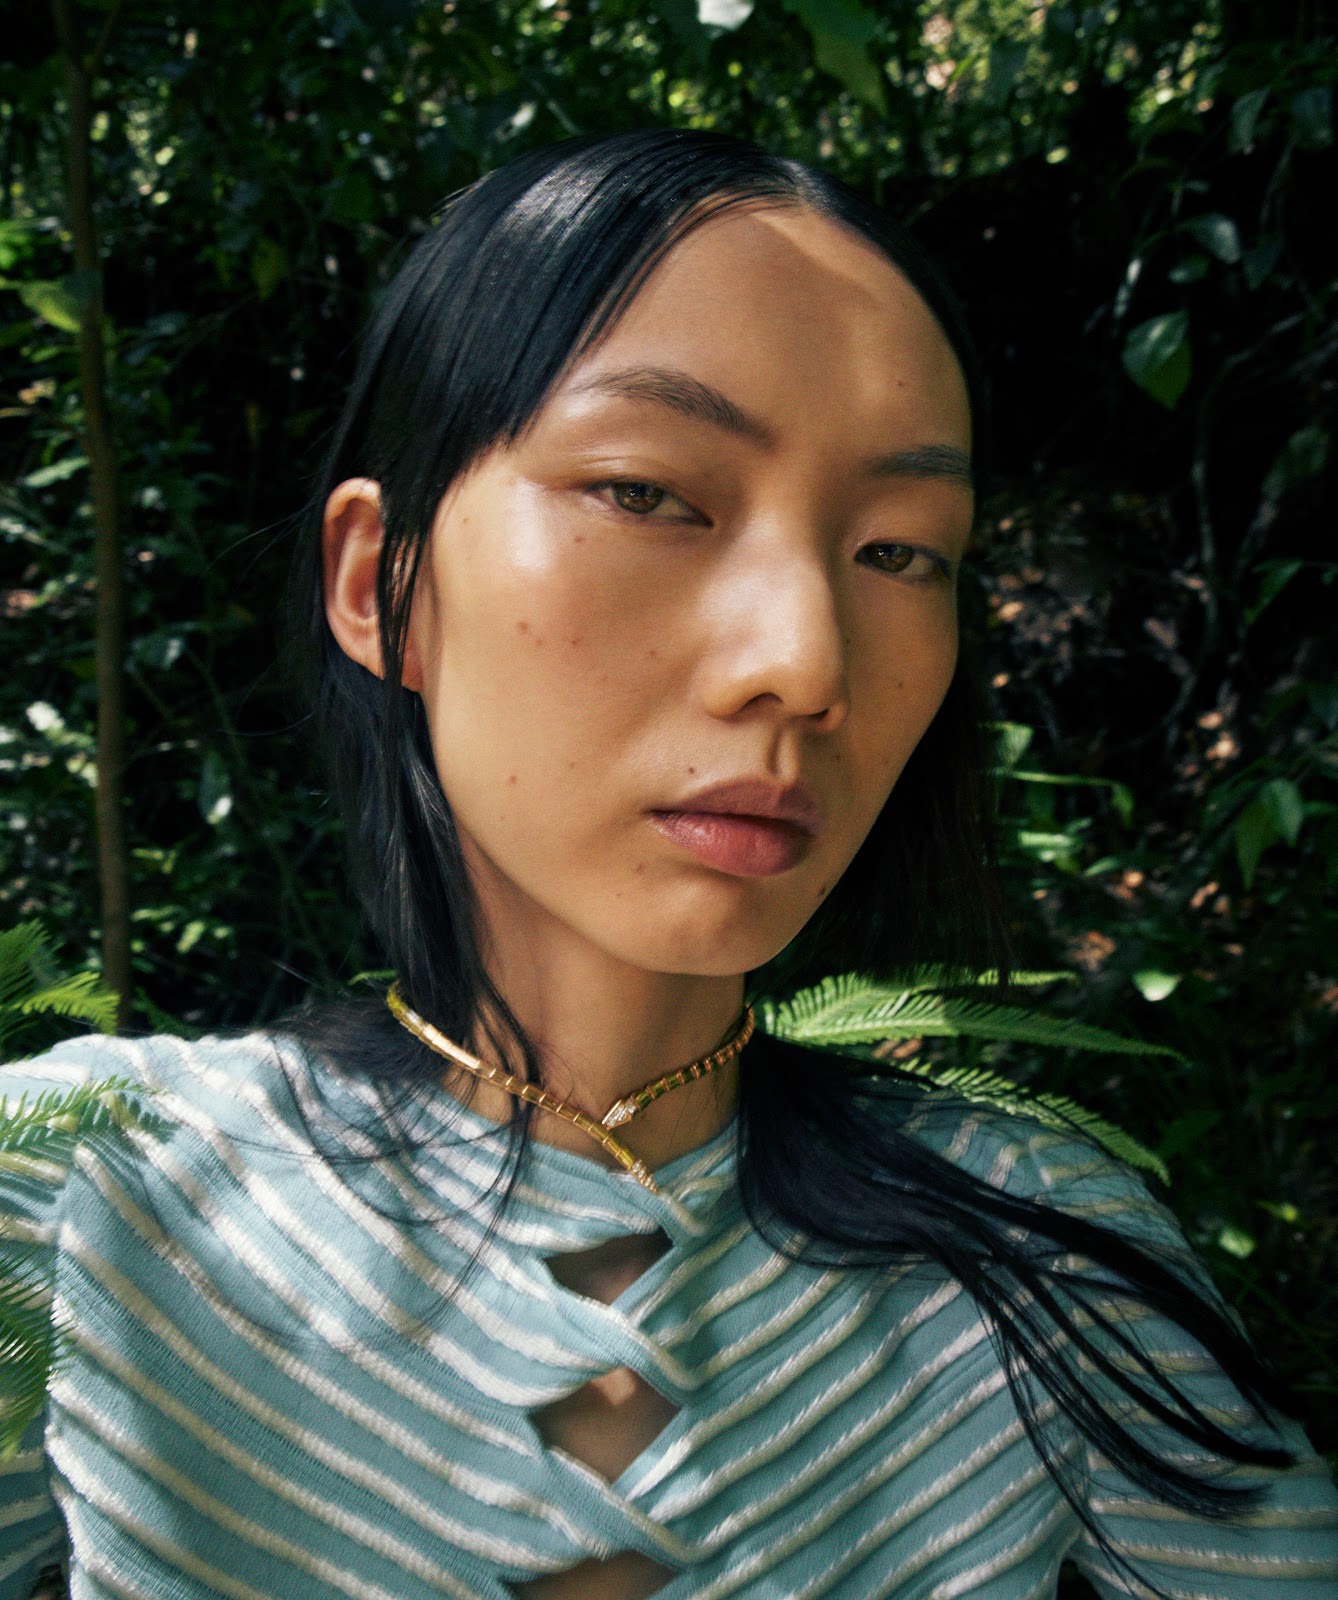 Ploy Rida & Yixin Zhao in Vogue Australia March 2022 by Charles Dennington